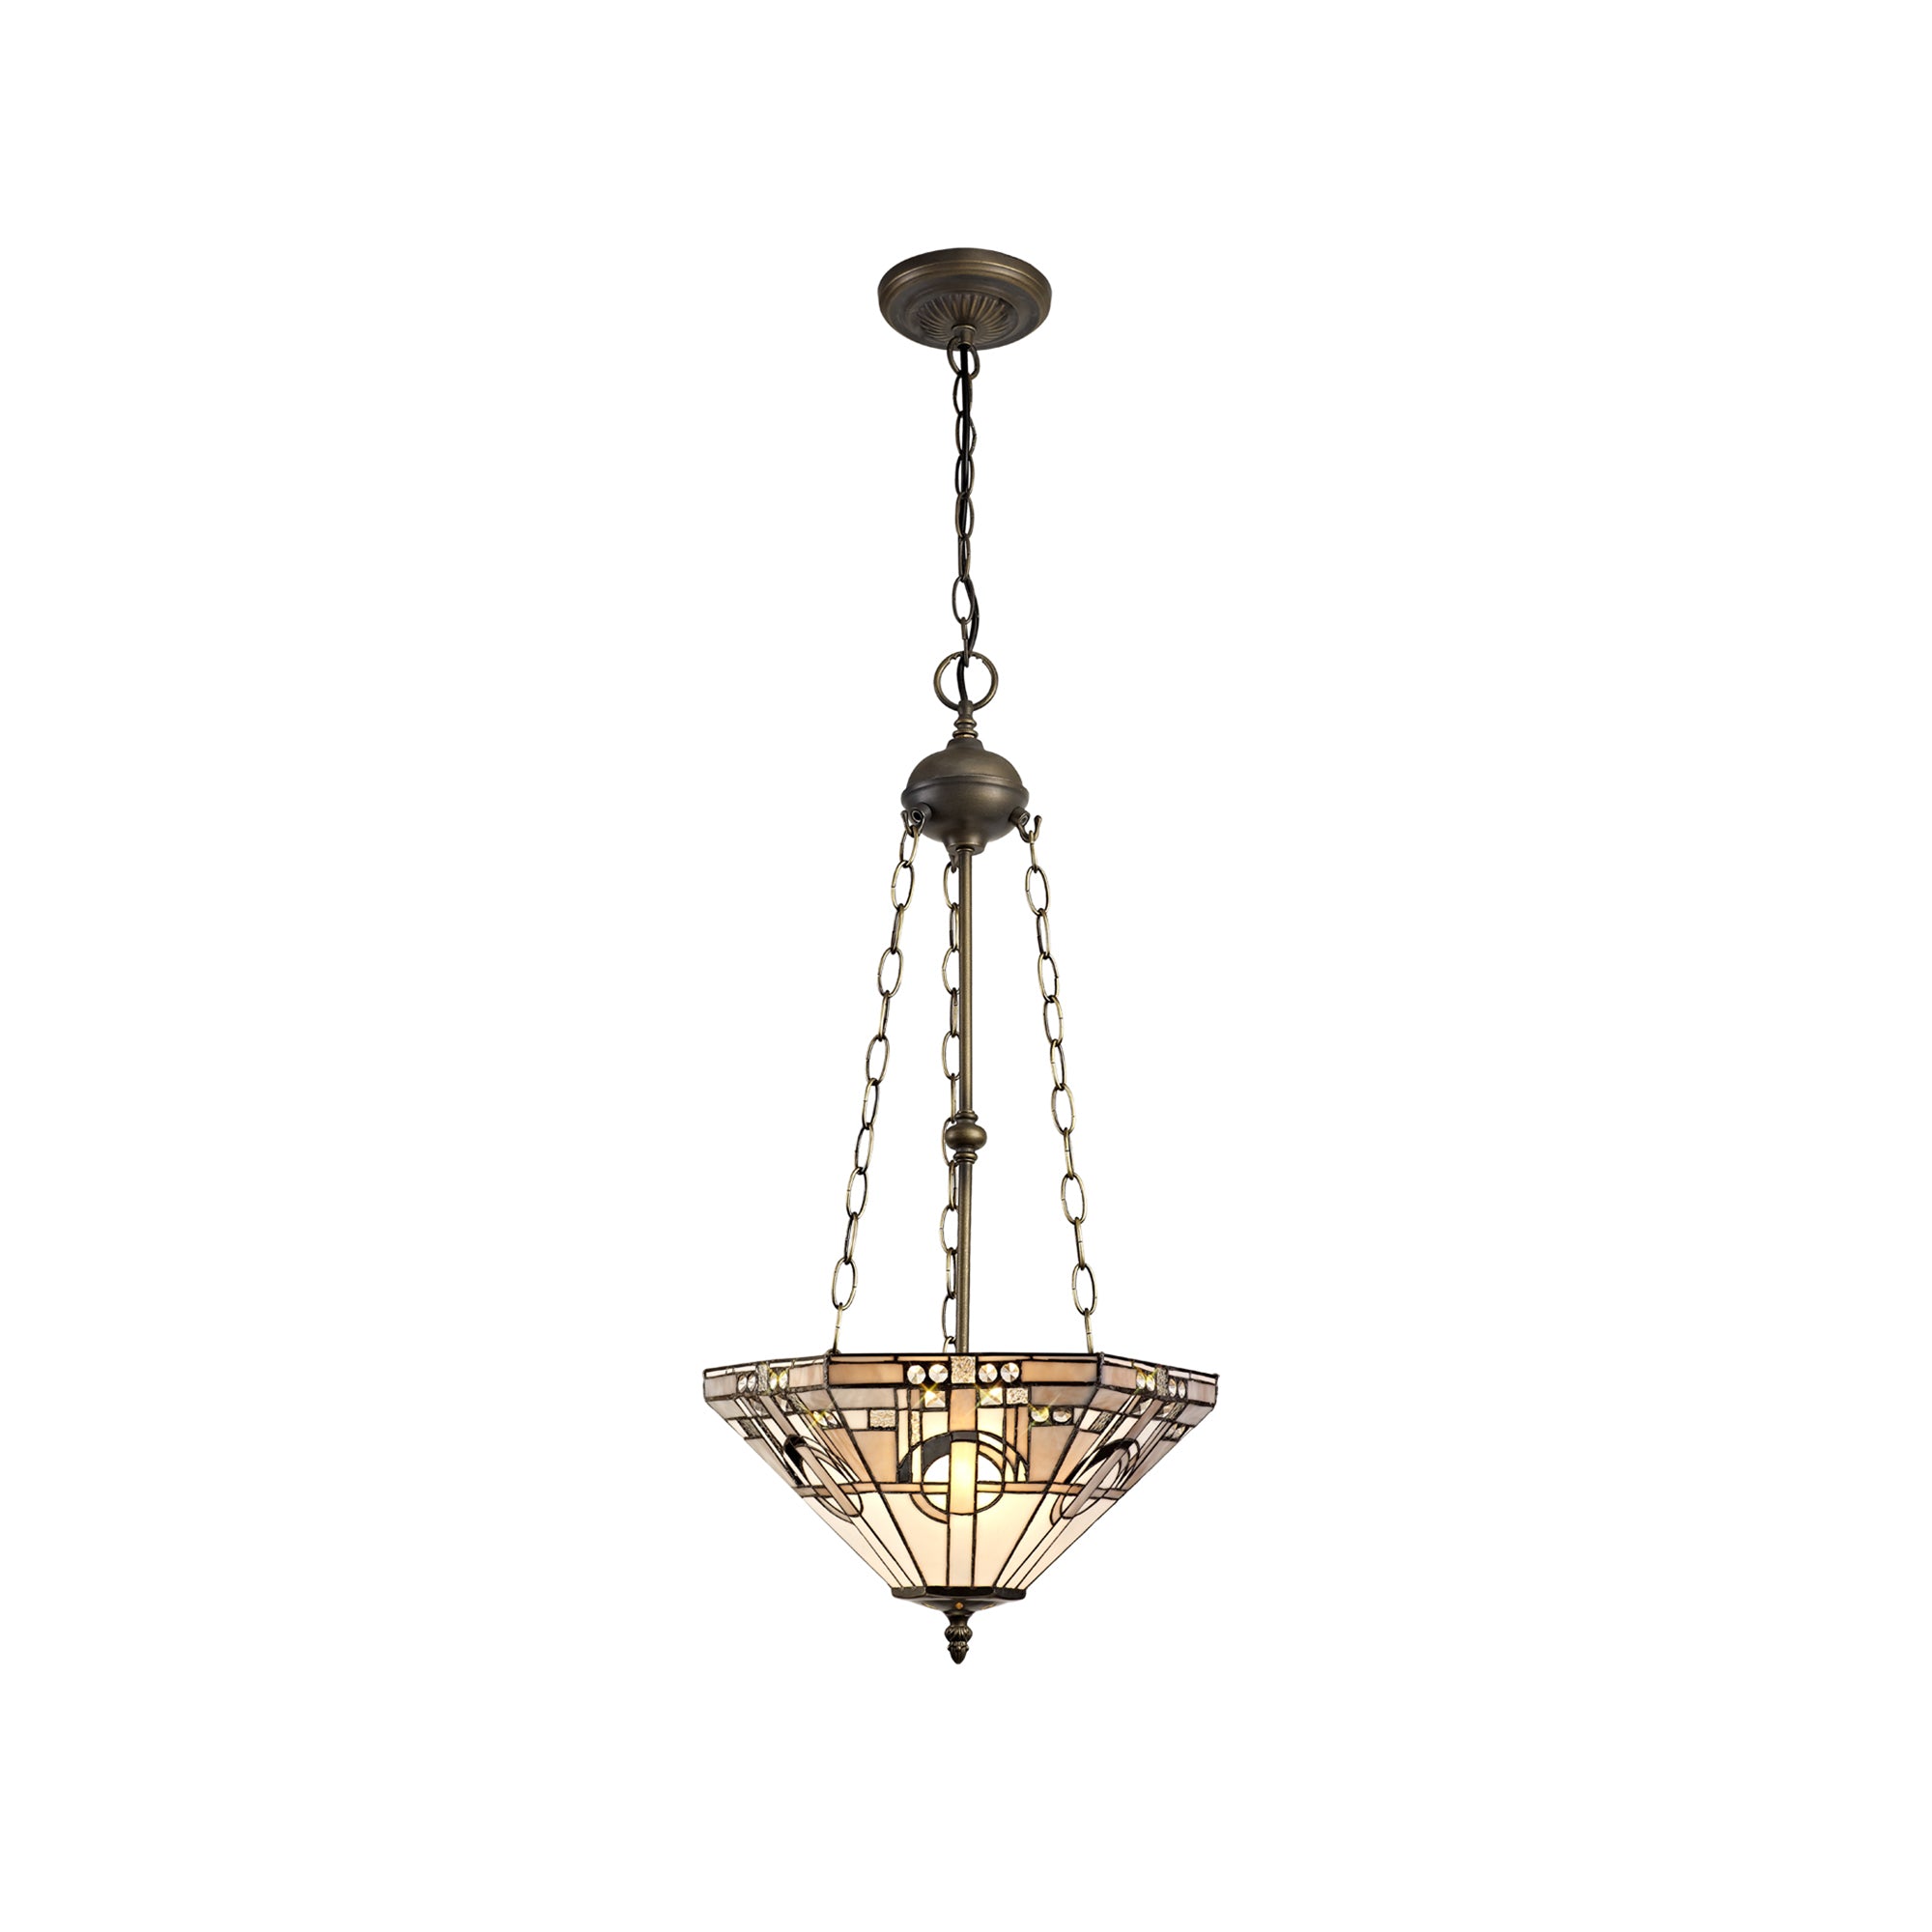 Atek 3 Light Uplighter Pendant E27 With 40cm Tiffany Shade, White/Grey/Black/Clear Crystal/Aged Antique Brass